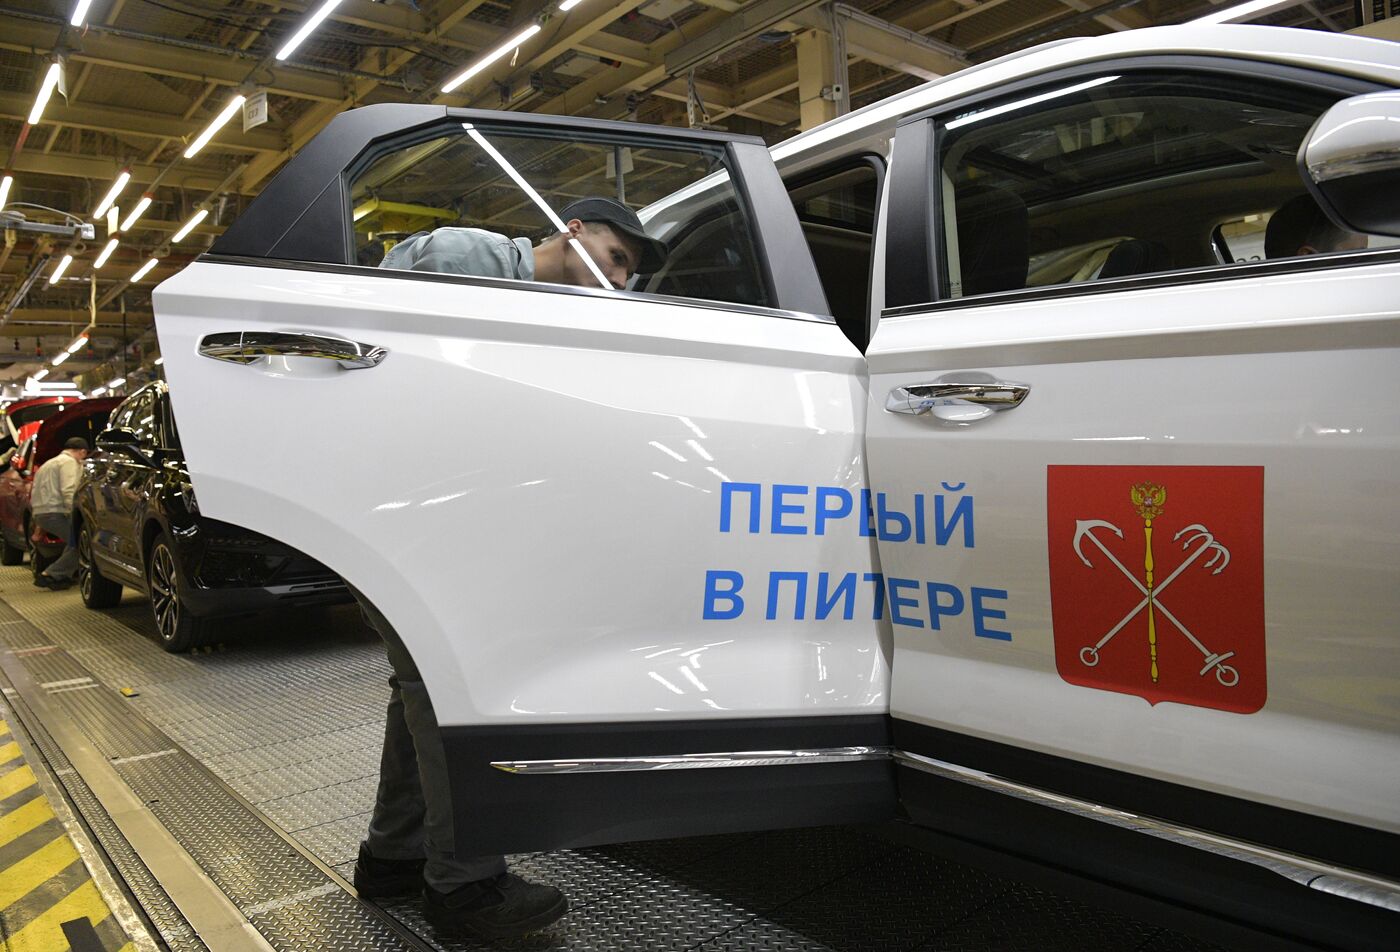 SPIEF-2023. Ceremony to launch the first LADA X-Cross 5